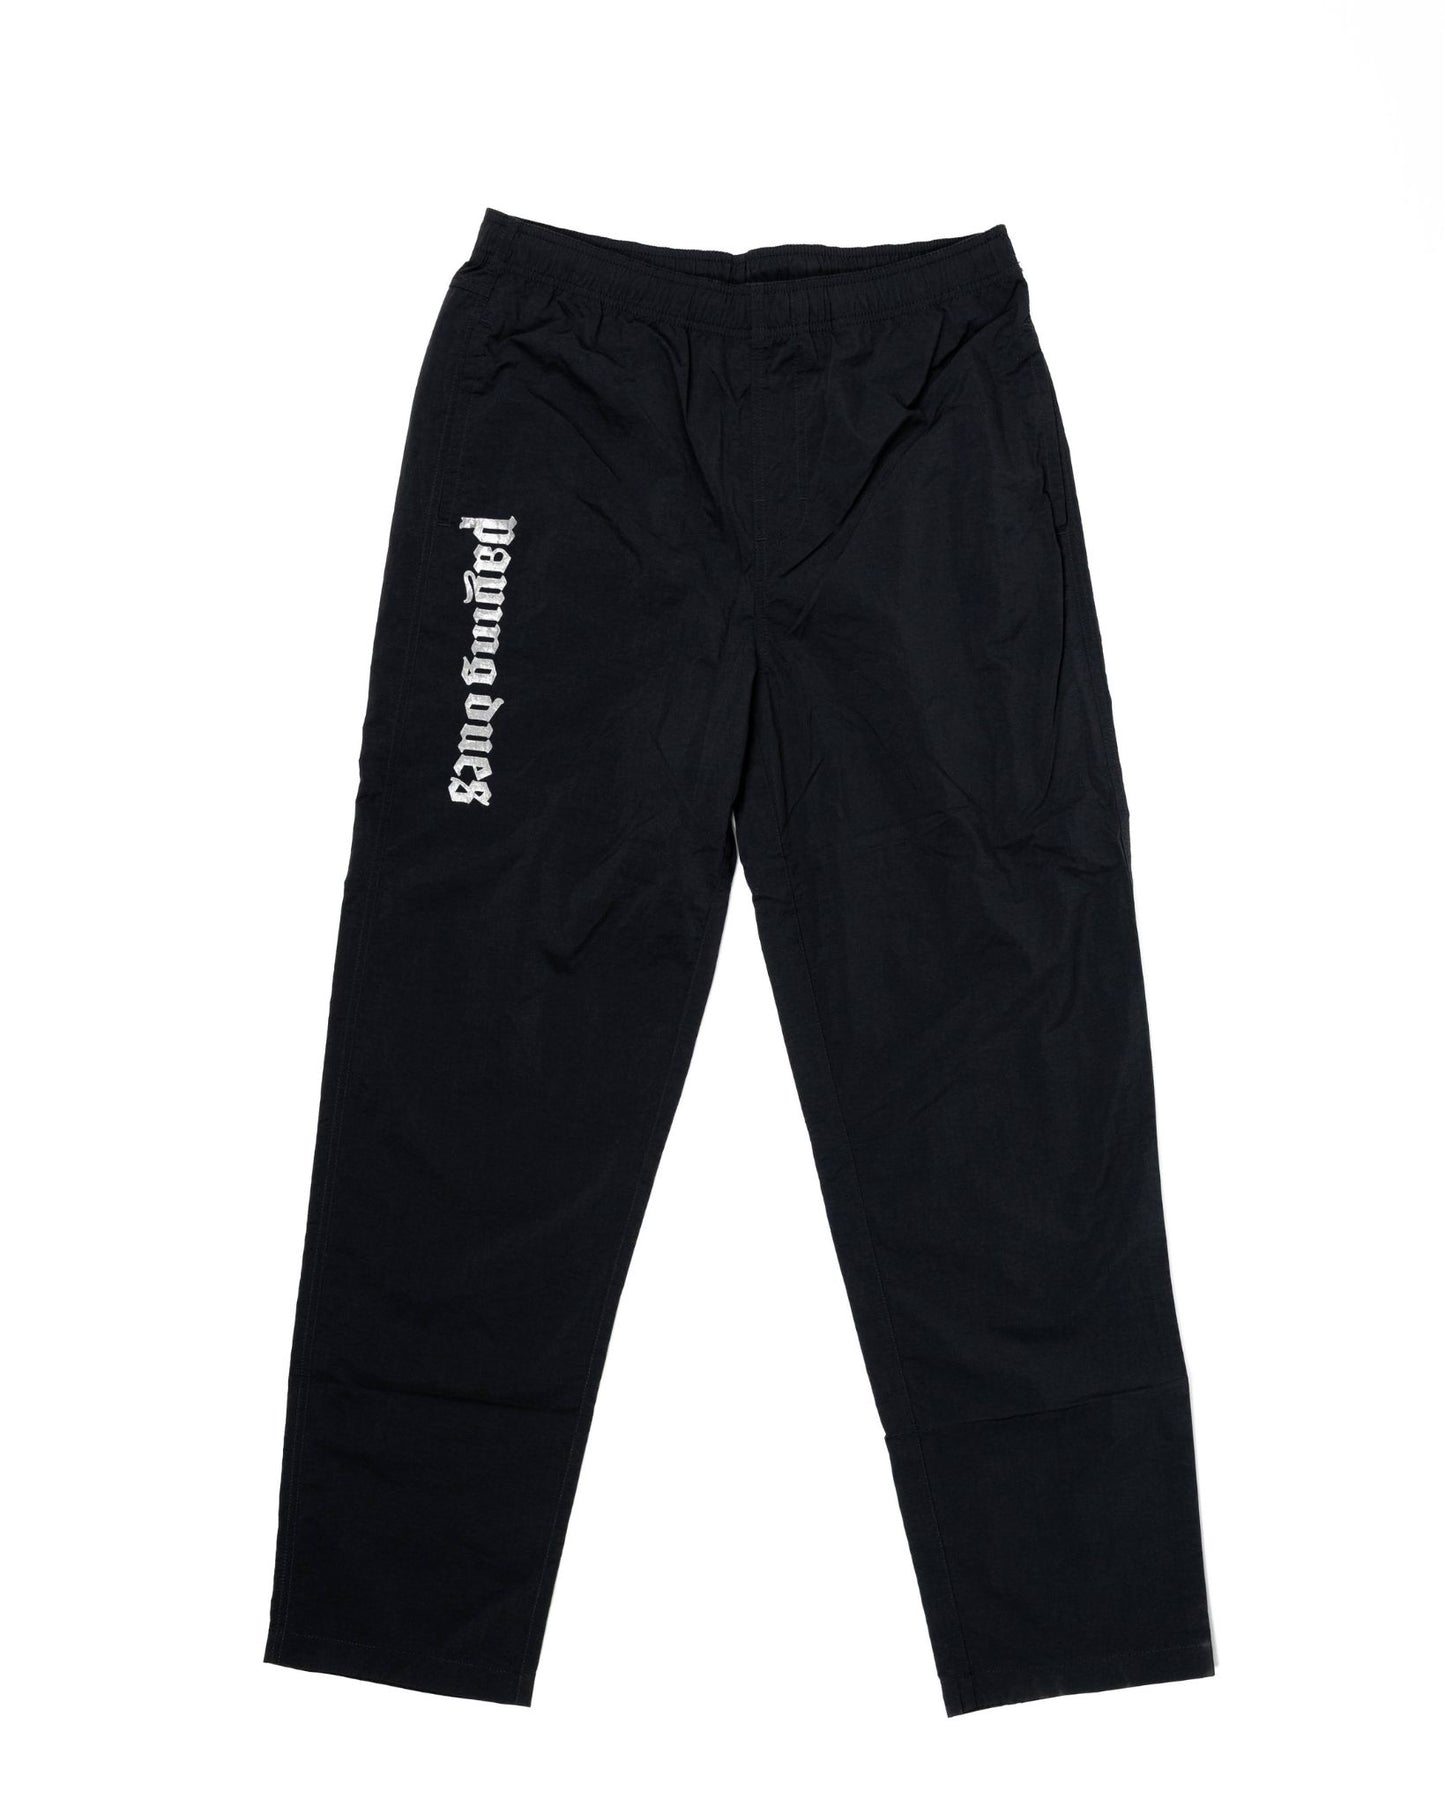 Bulged Founder Warm Up Pants